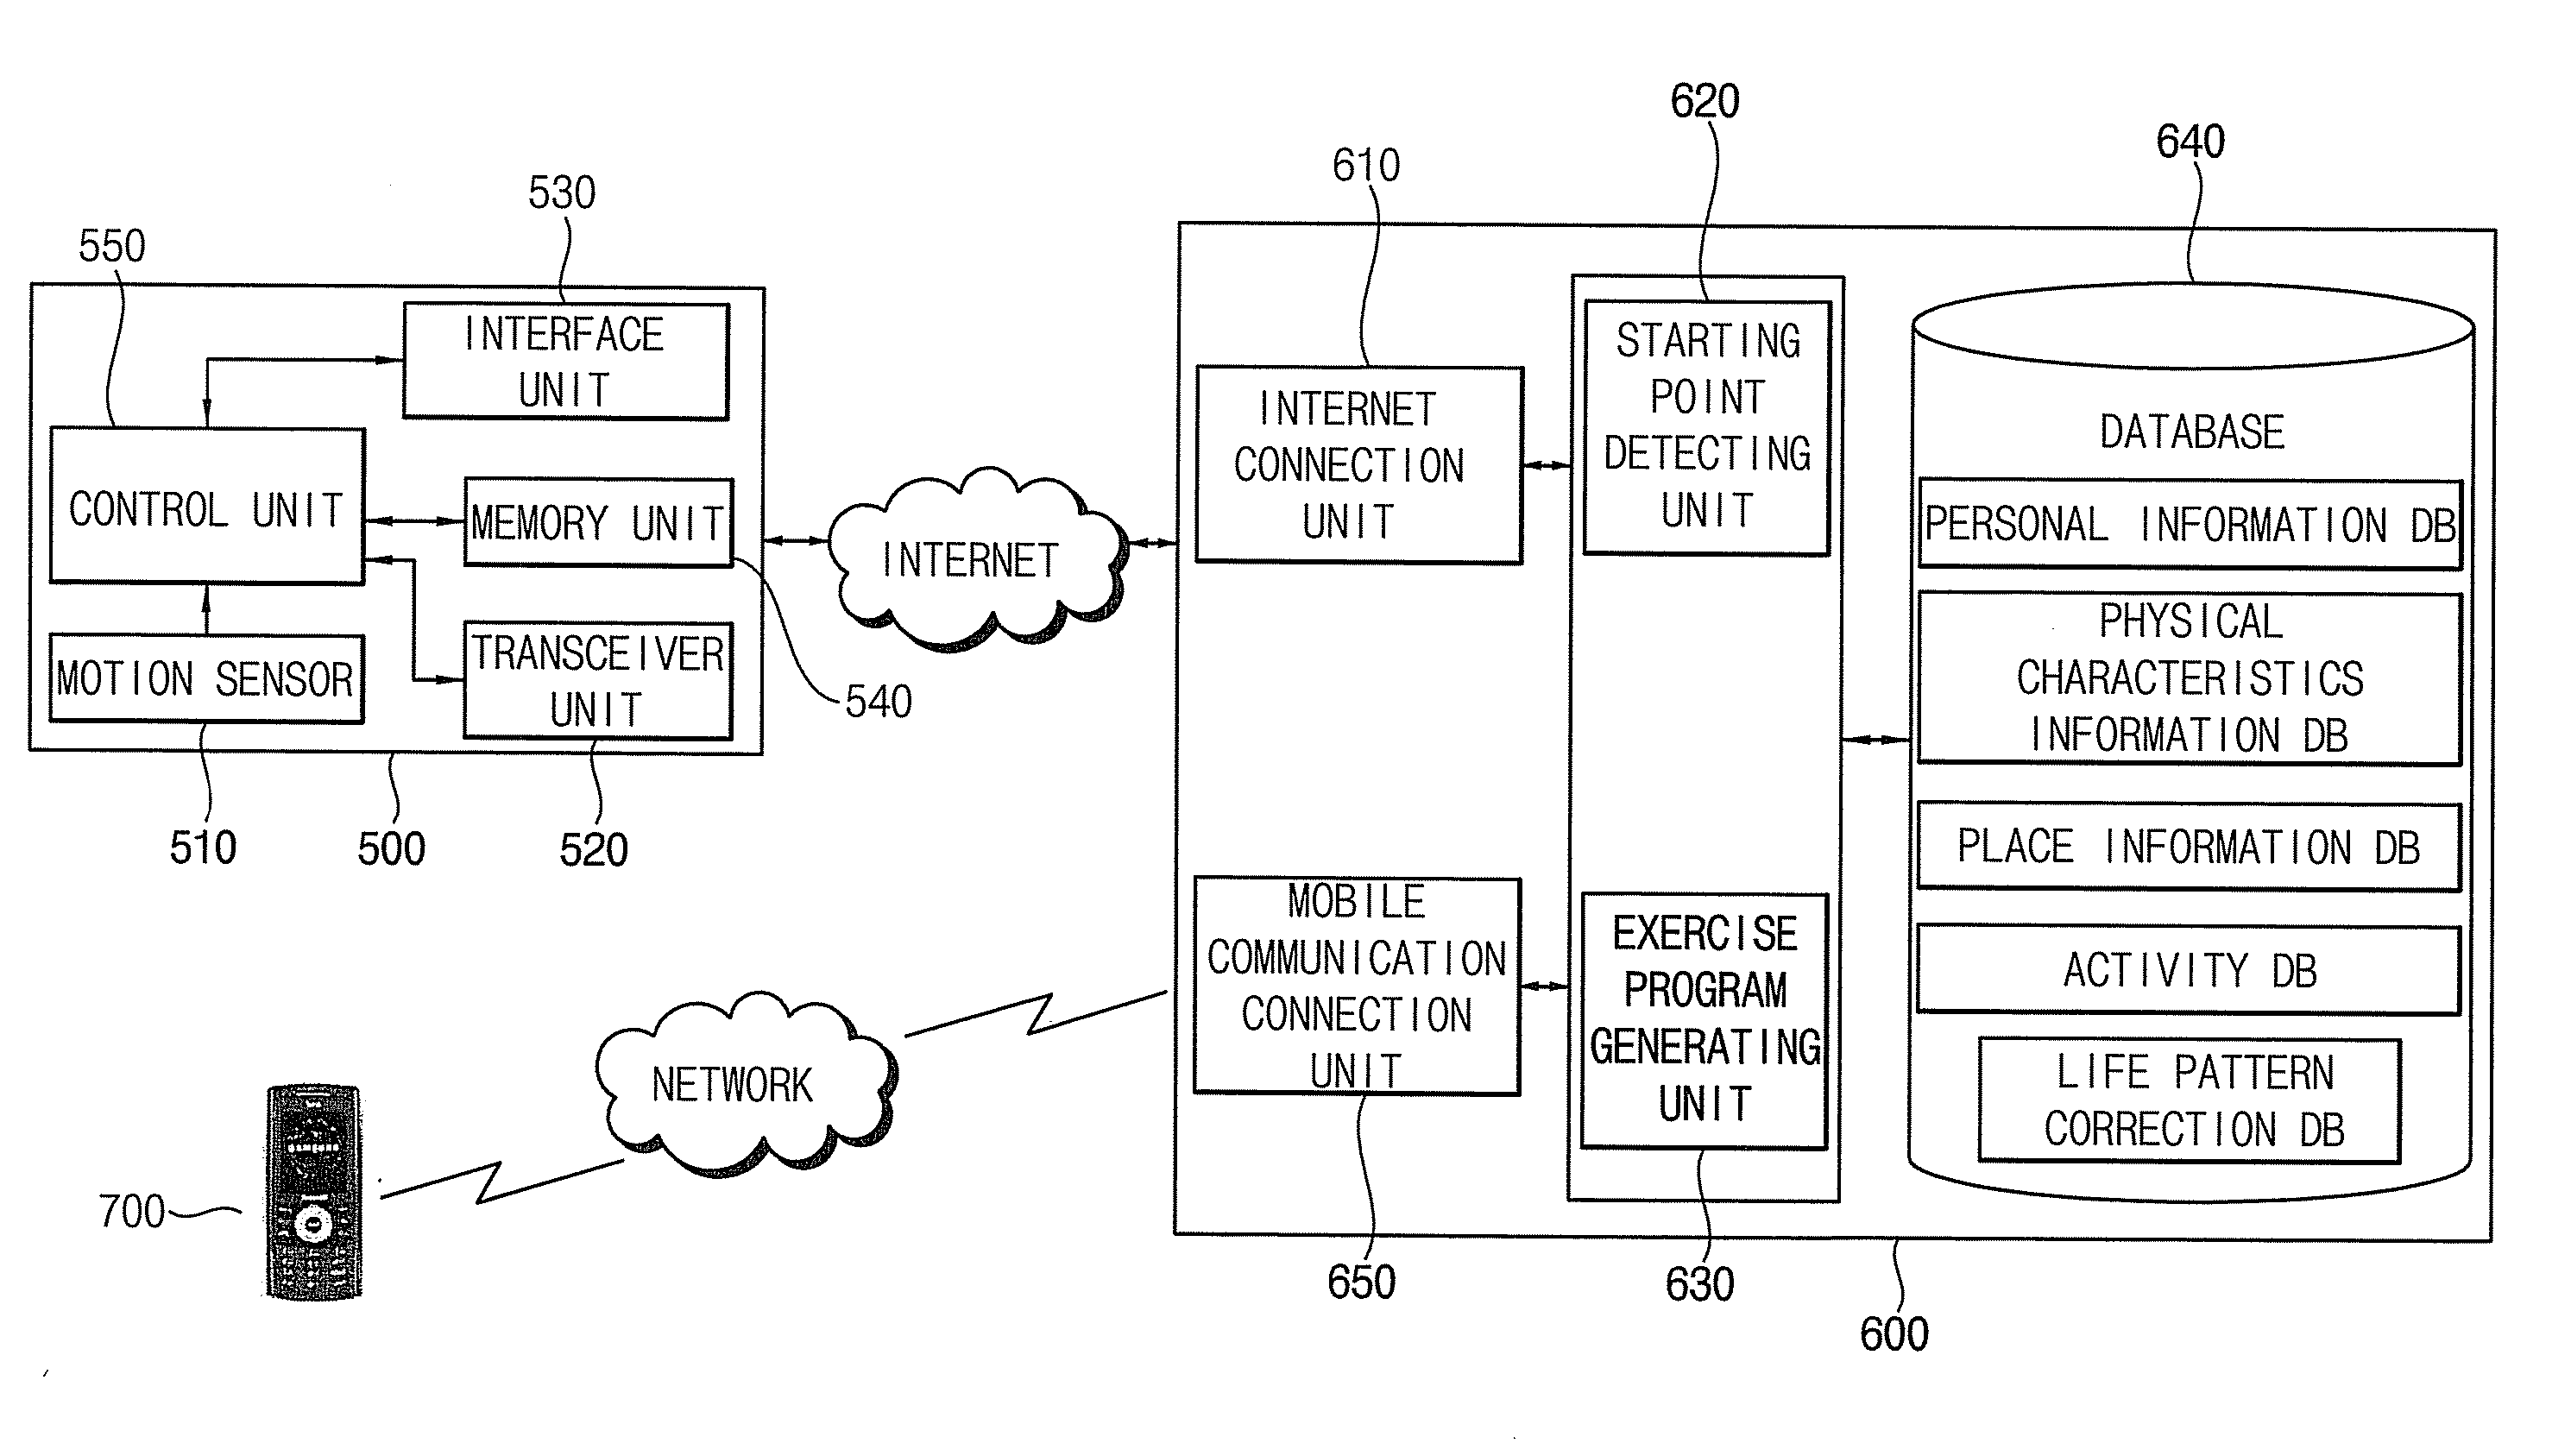 Apparatus and method for correcting life patterns in real time